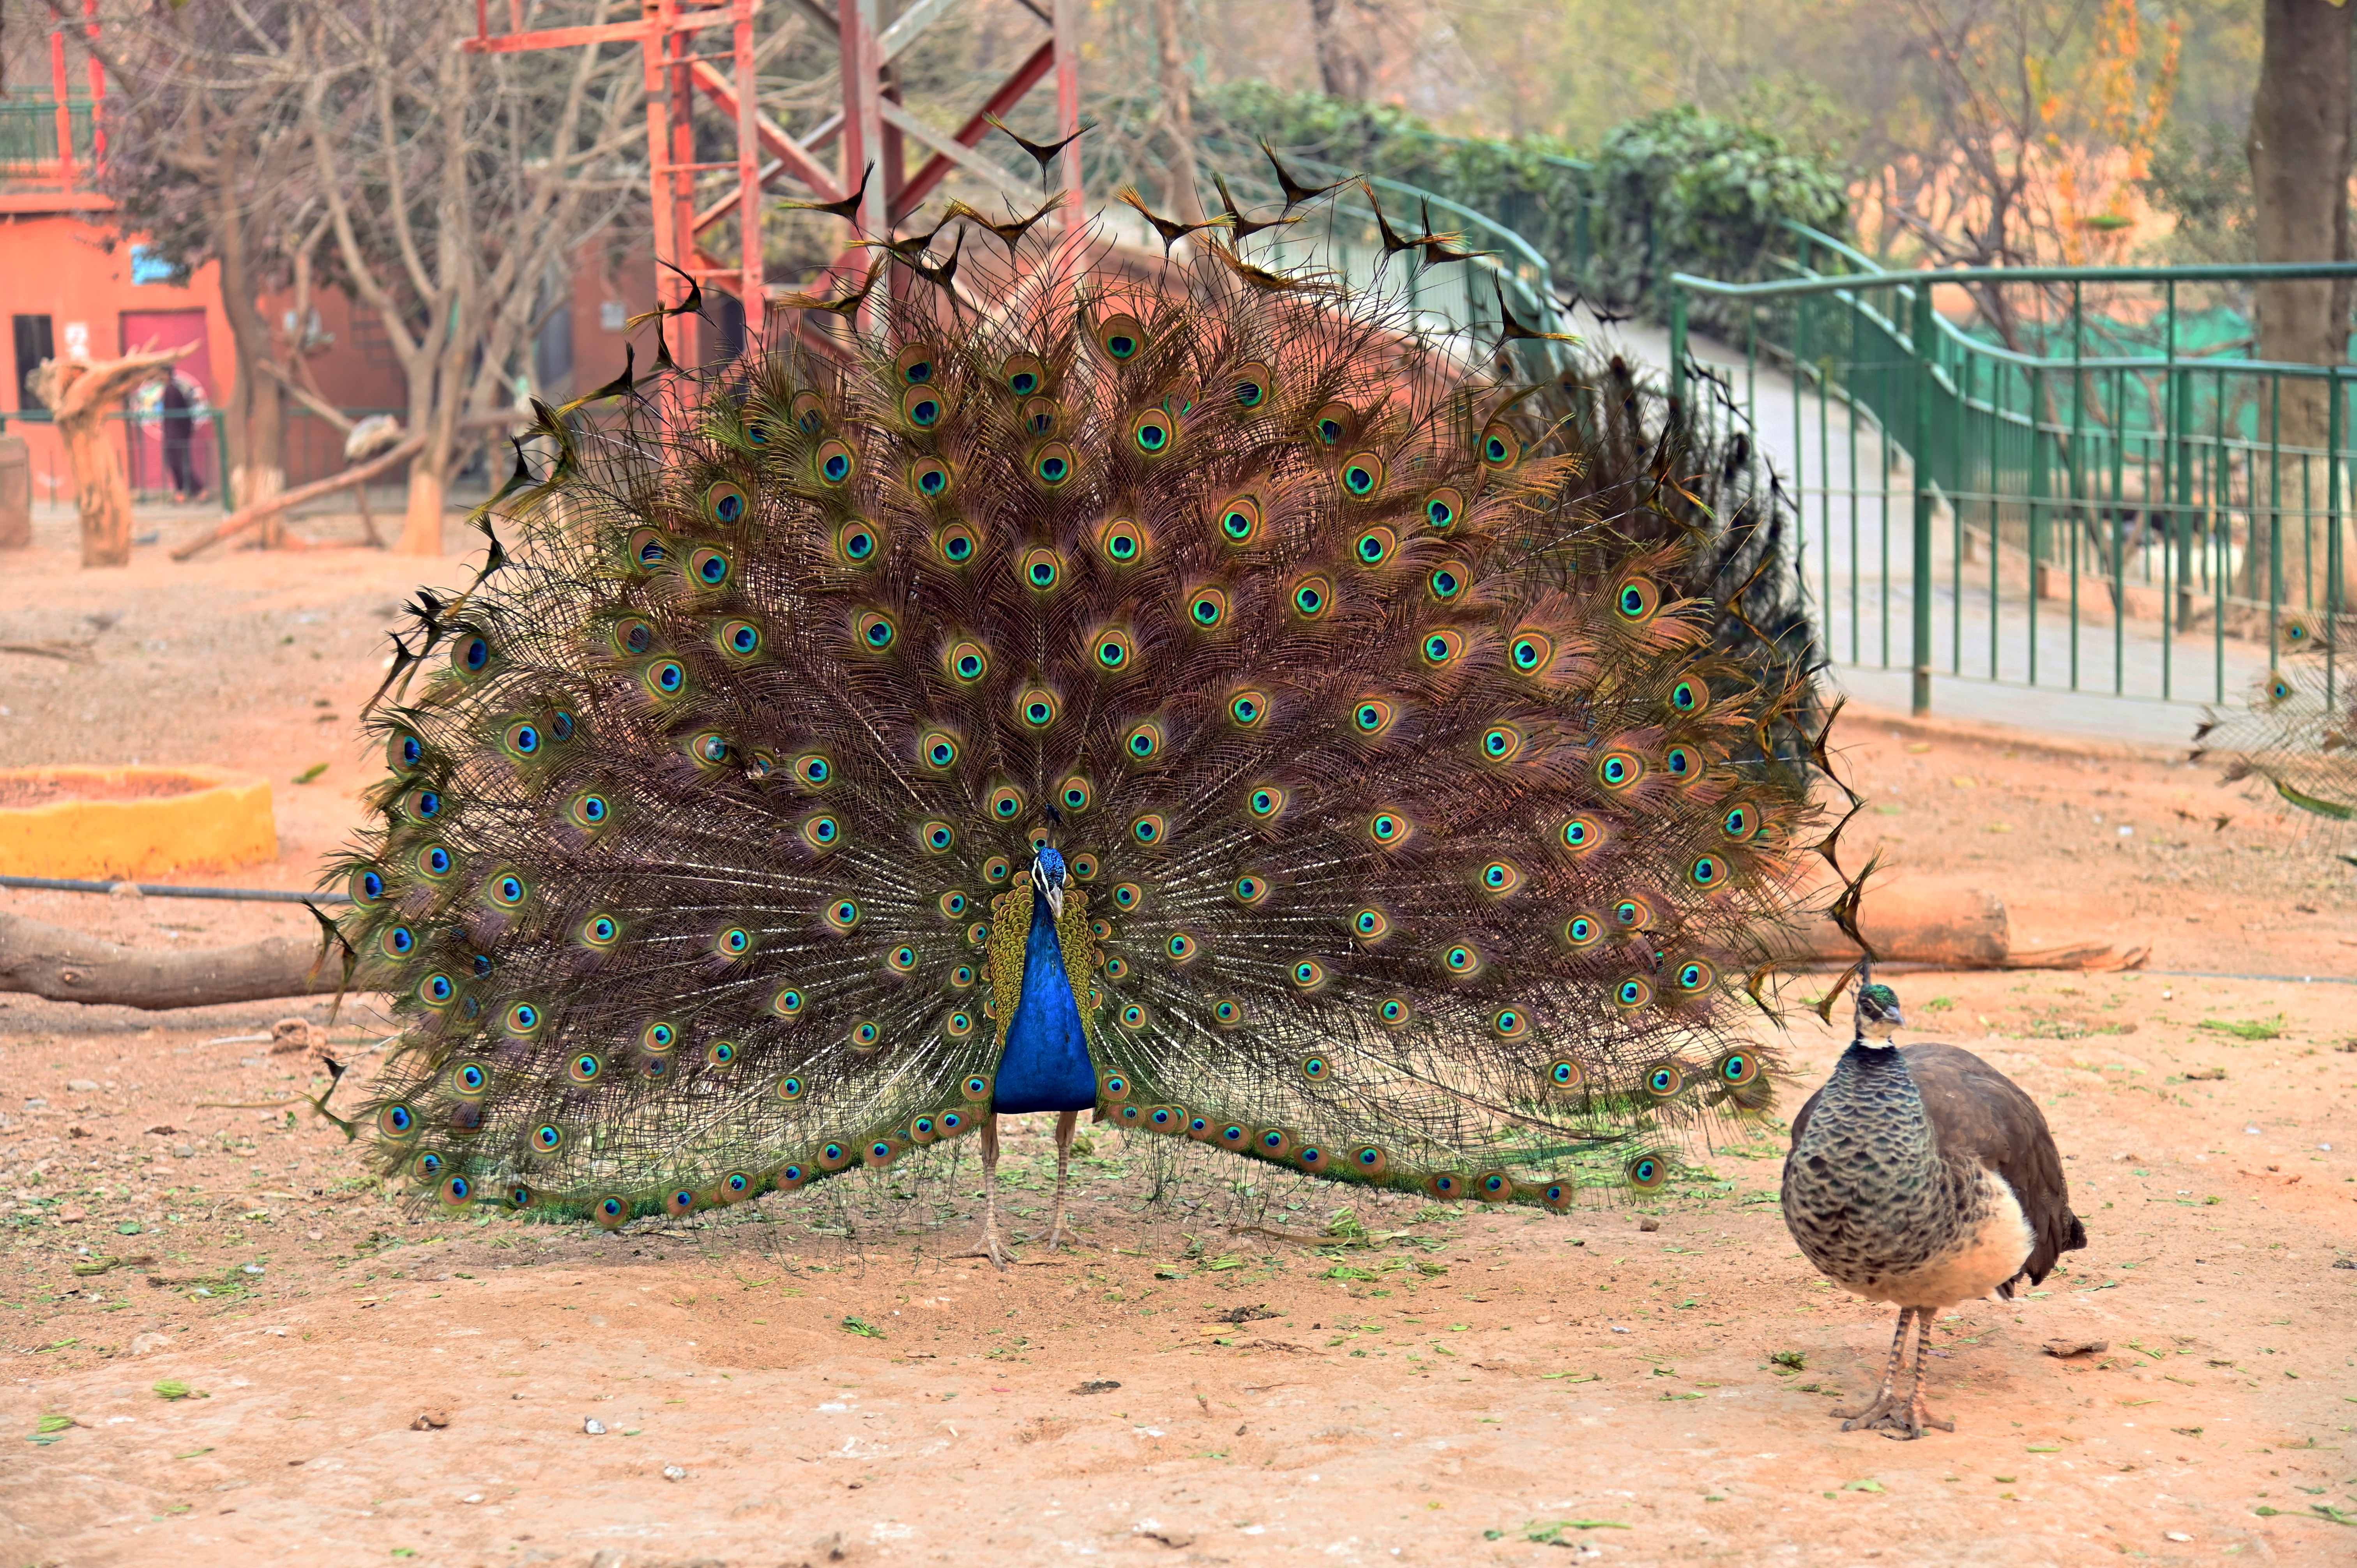 A peacock with open feathers in Birds Aviary